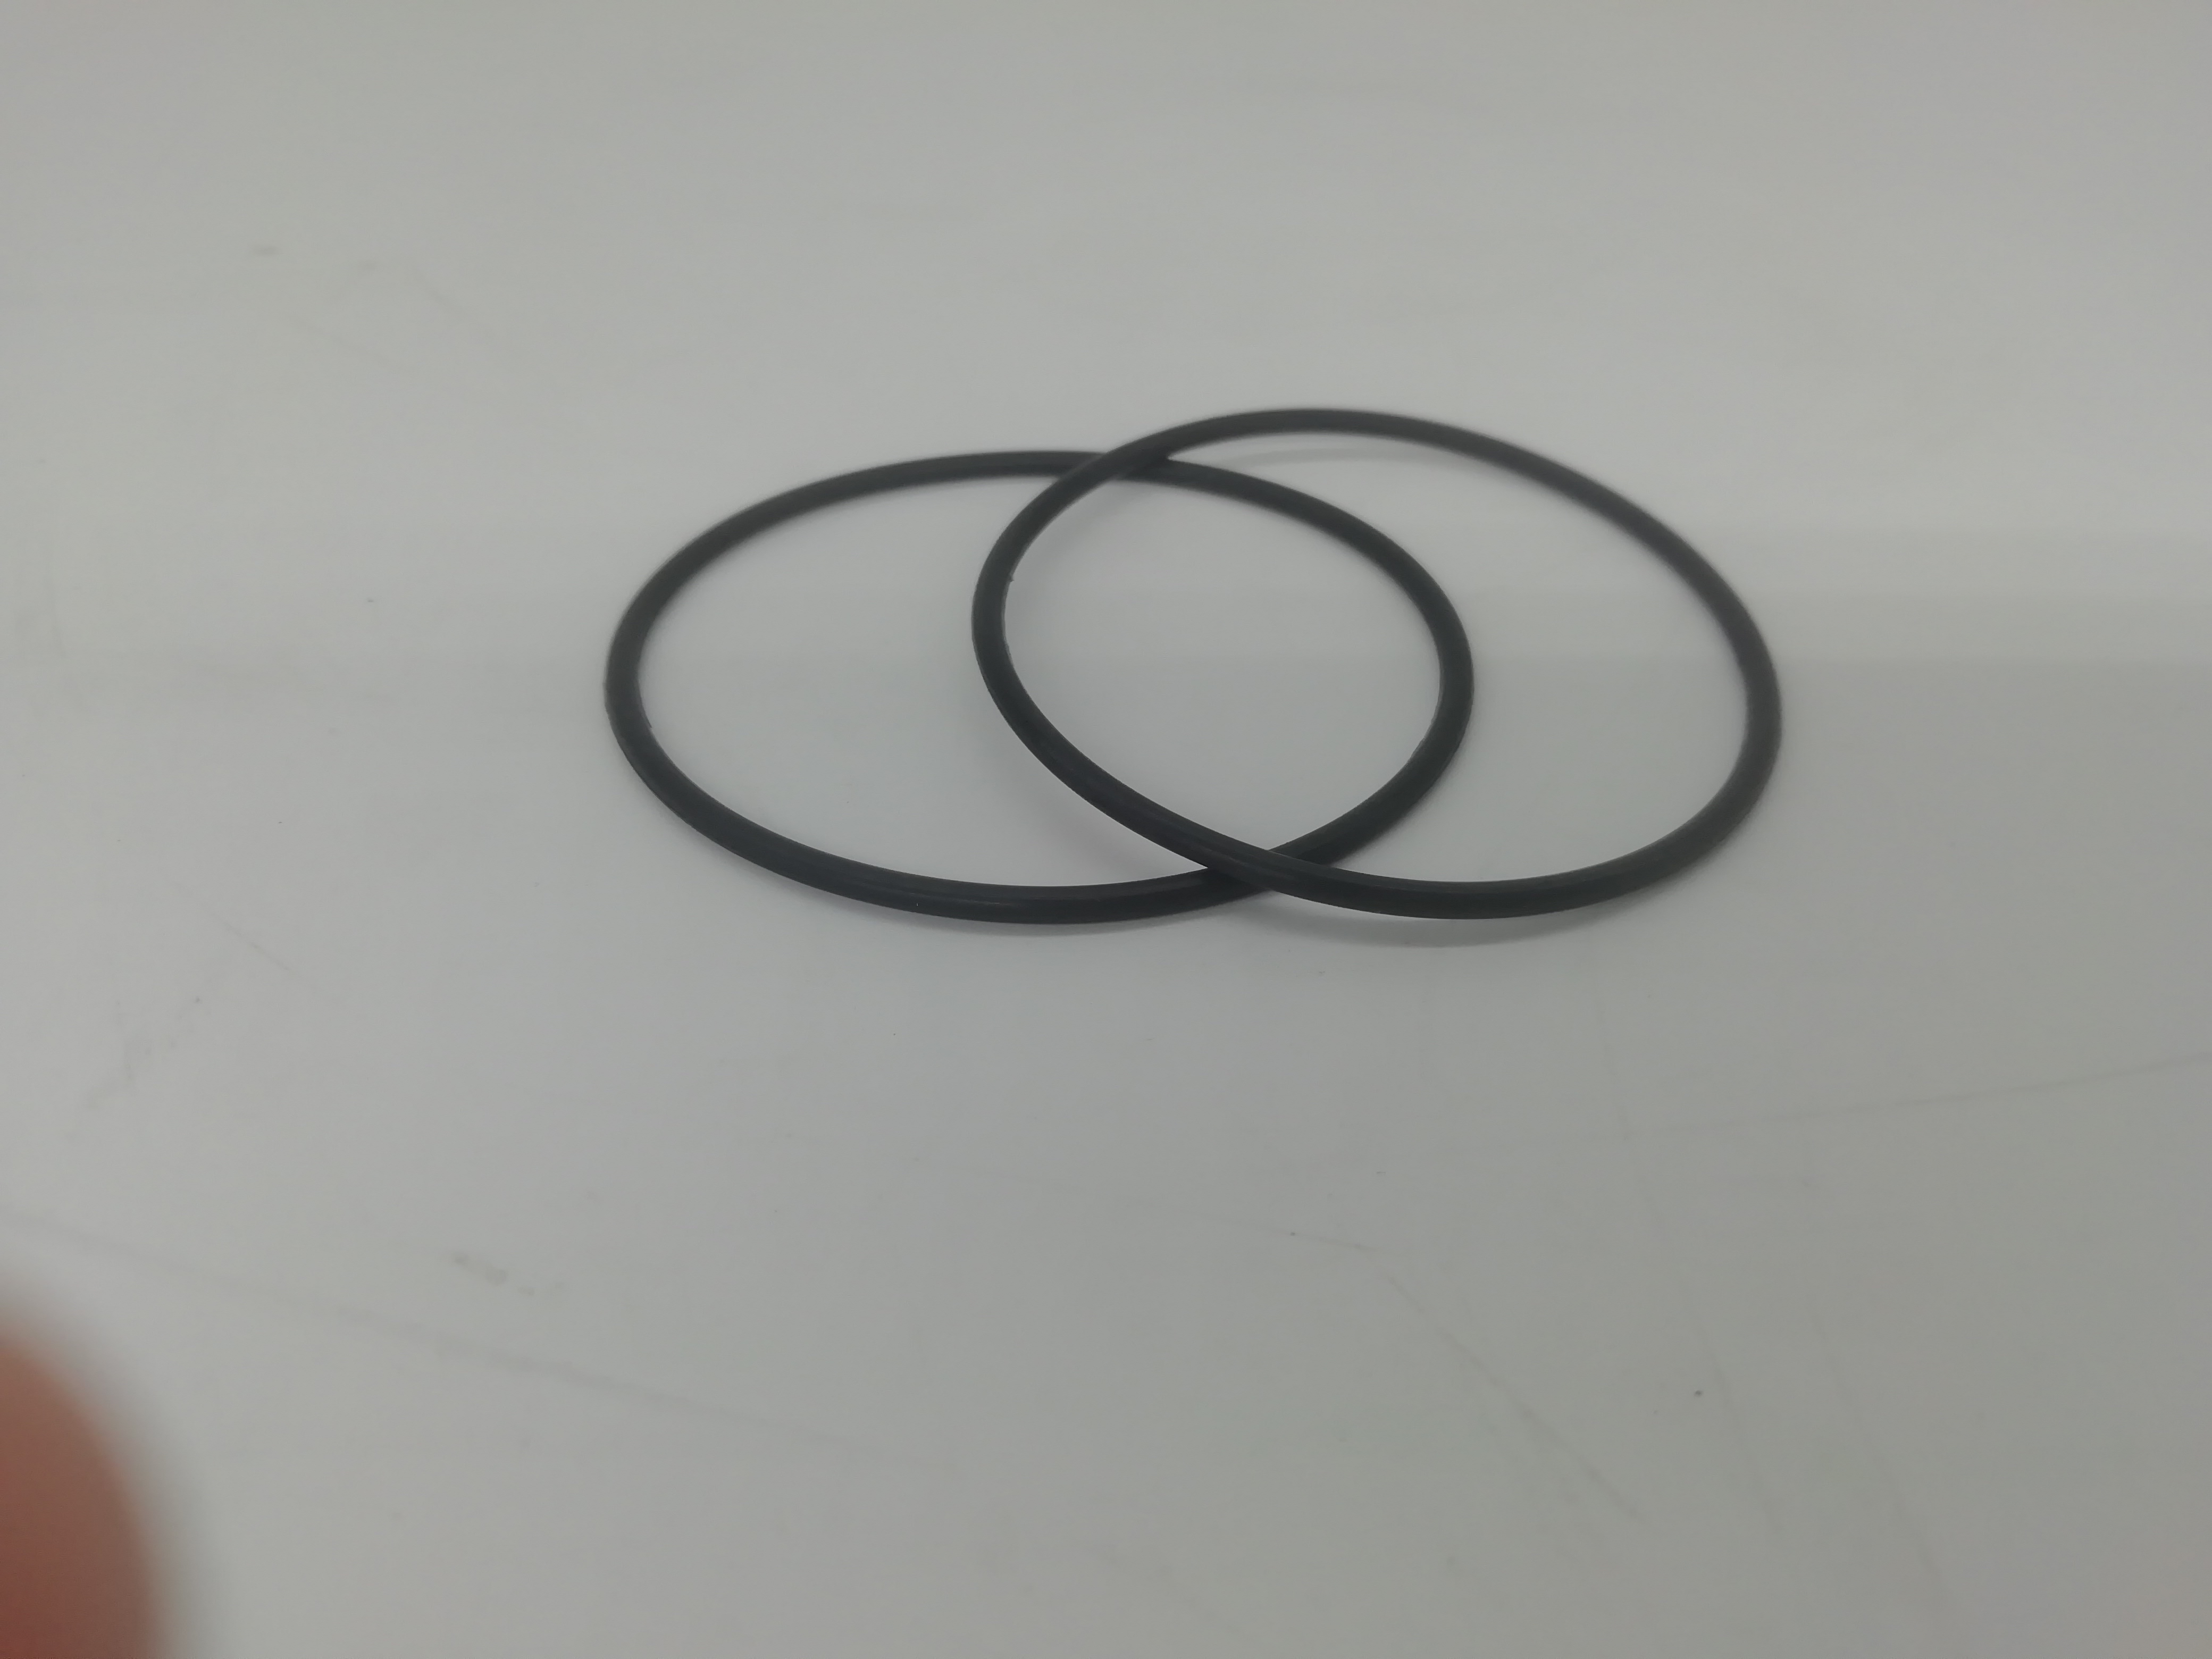 Ingersoll Rand Spare Parts O-ring 95061024